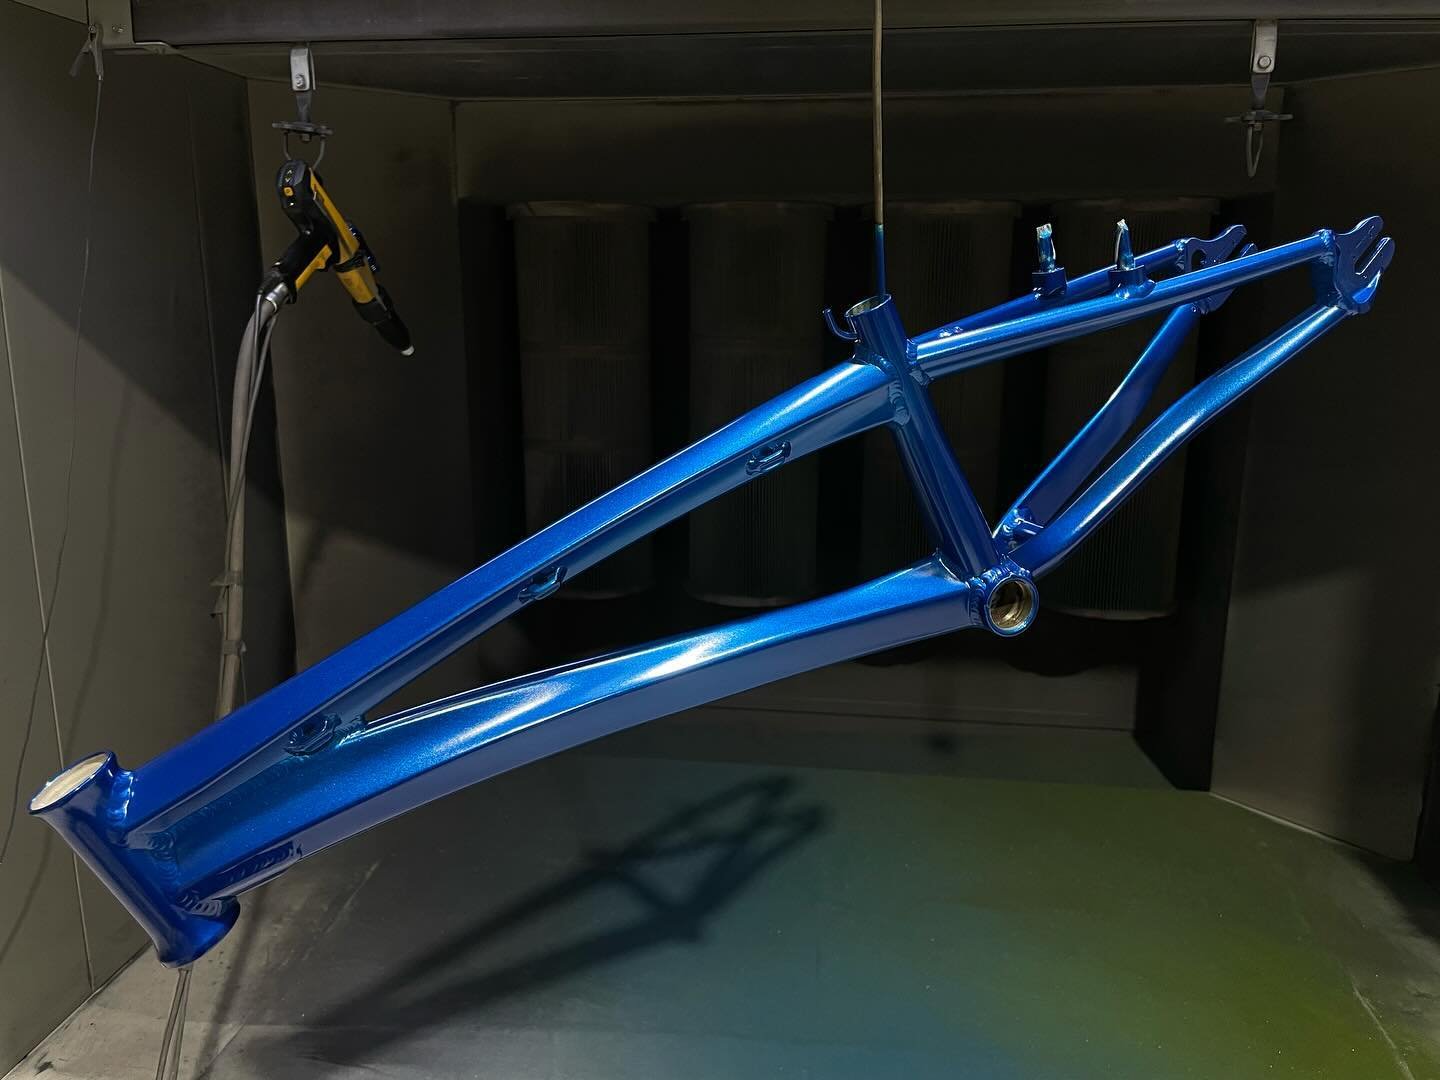 Anodised Blue over Alien Silver 💙
#epicpowdercoating #needpowdercoating #powdercoatingporn #powdercoatinglife #powdercoatingnation #powdercoatingwork #qualitypowdercoating #precisionpowdercoating #showoffpowdercoating #extremepowdercoating #specialt